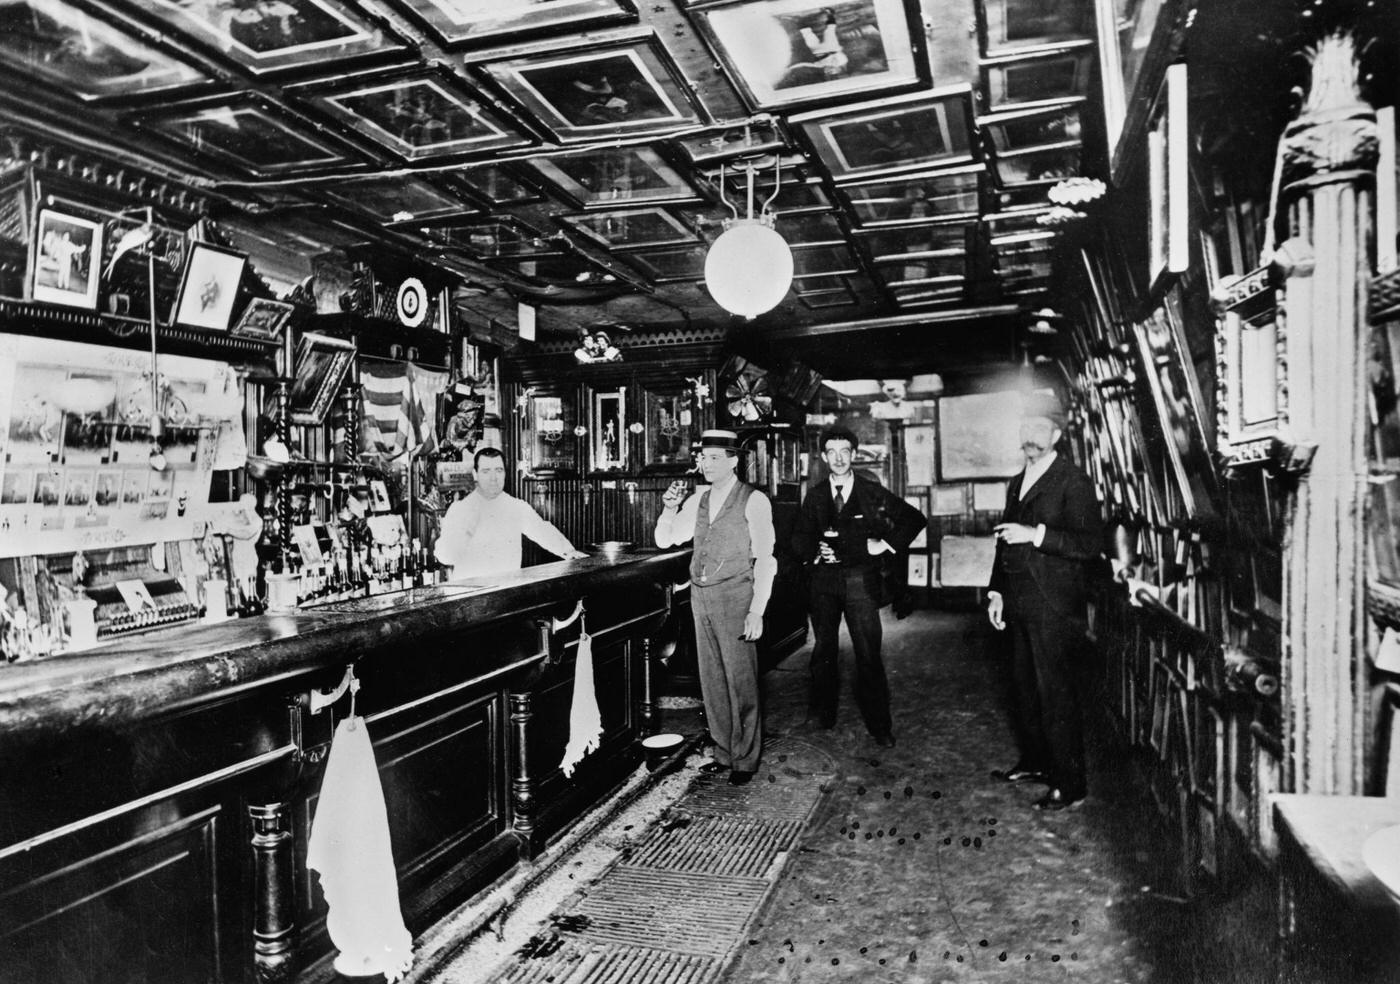 Customers And Bartender At Steve Brodie'S Bar And Tavern At Hester And Grand Street On The Bowery, New York City, 1887